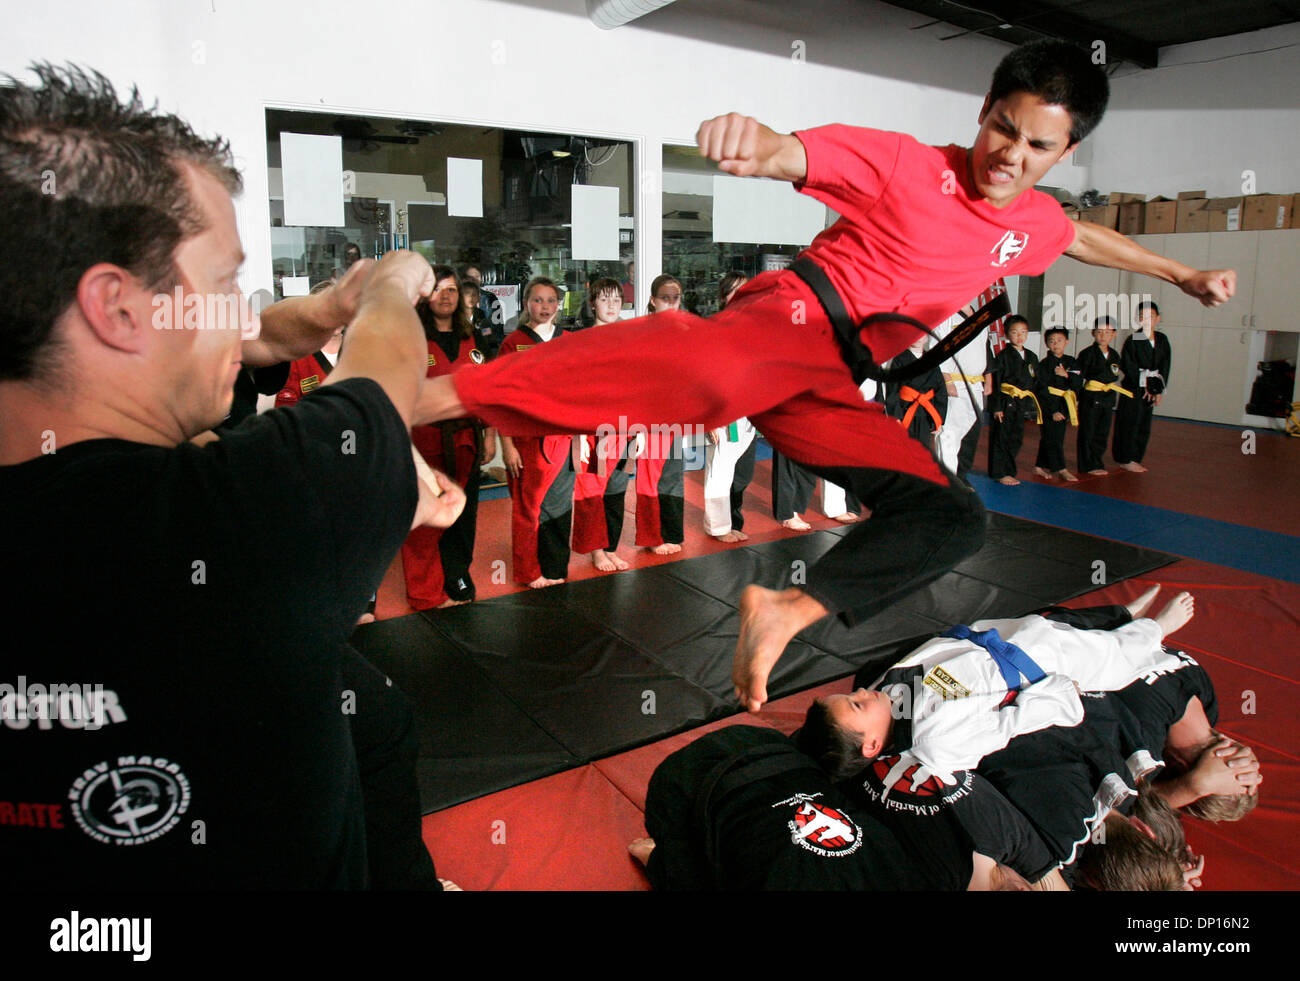 Apr 21, 2006; San Marcos, CA, USA; At the International Institute of Martial Arts instructor STEVEN NGUYEN performs a flying side kick to break a board held by Chief Instructor TRAVIS BARTLETT, at close left, as he leaps over young student PARKER RUTHERFURD that's laying on top of other students. They're practicing for their upcoming demonstration. Mandatory Credit: Photo by Charli Stock Photo